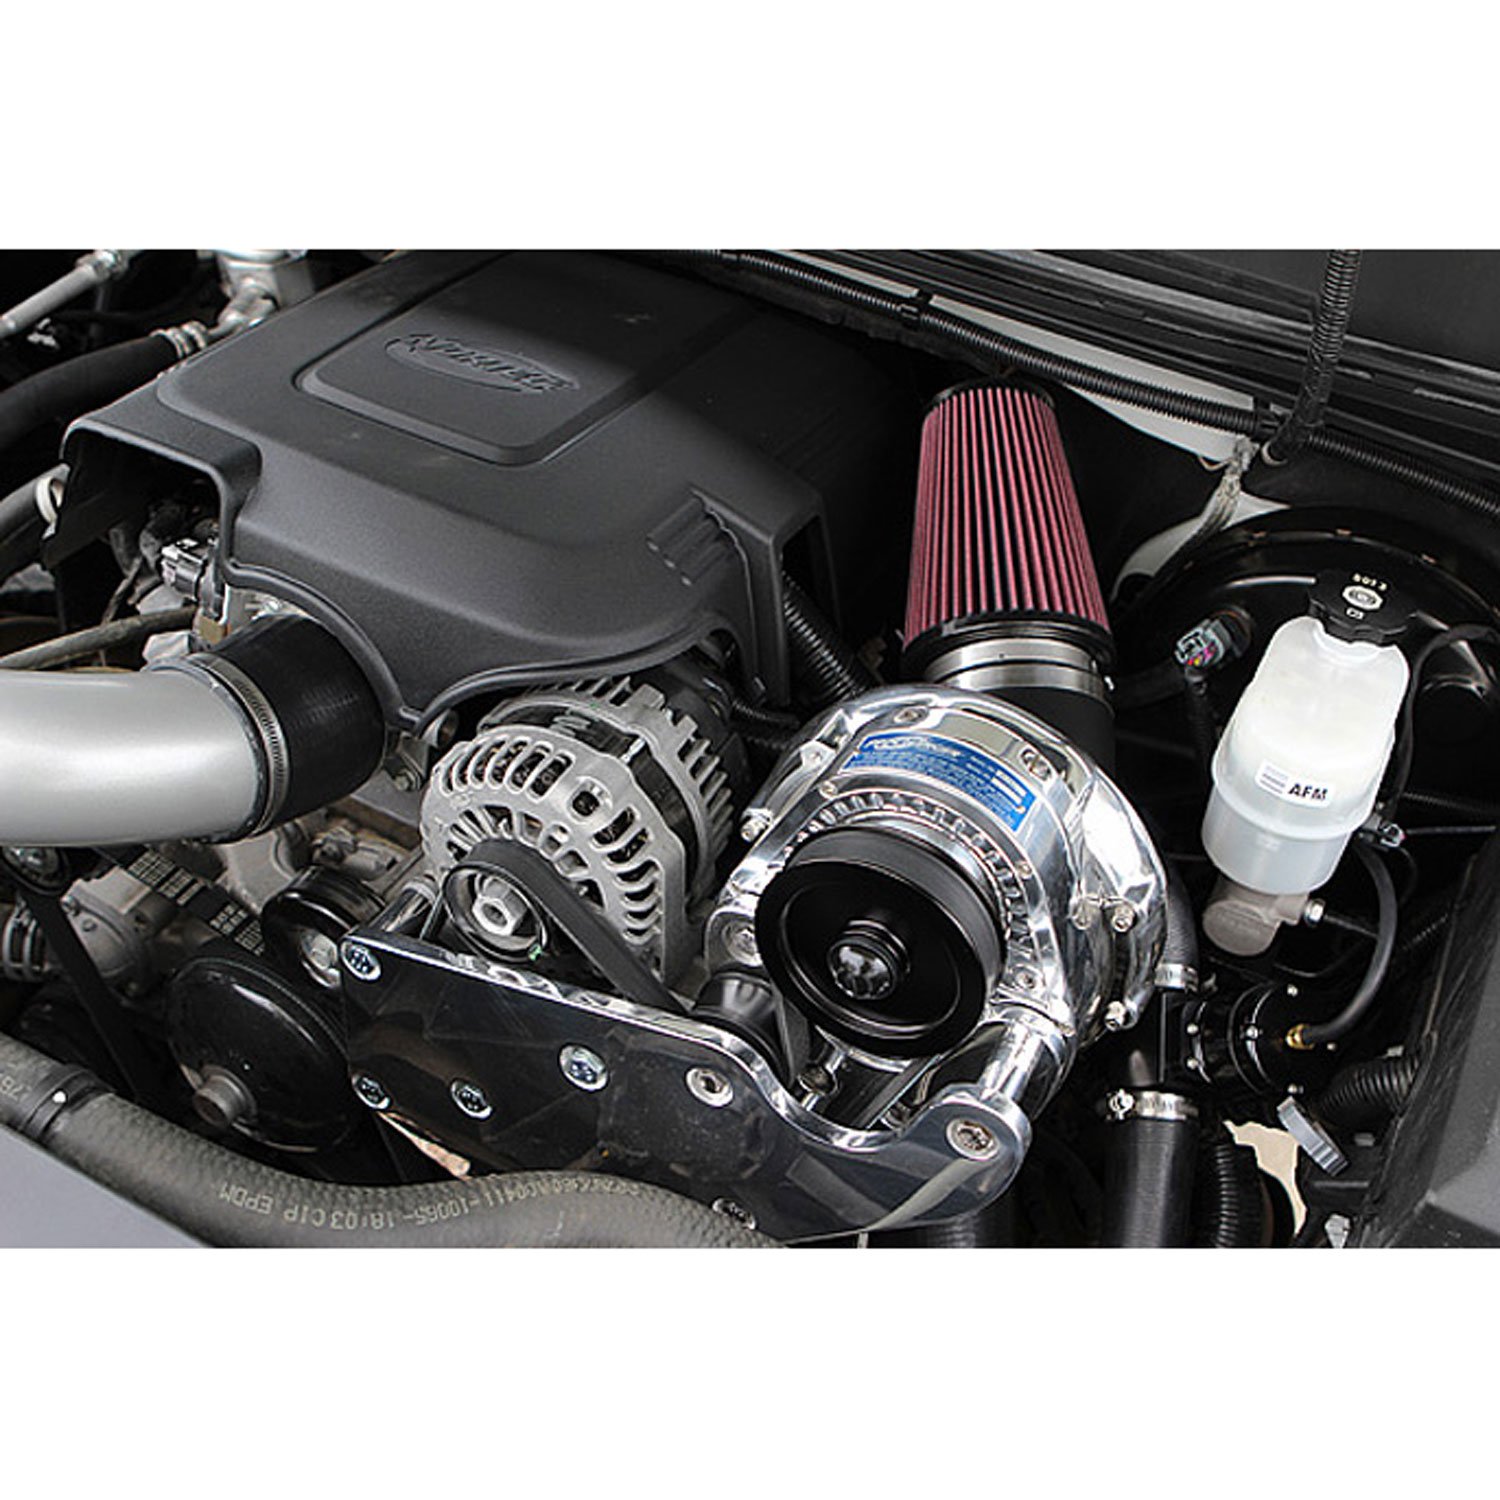 High Output Intercooled Supercharger System P-1SC-1 2007-2013 GM Truck/SUV 1500/2500